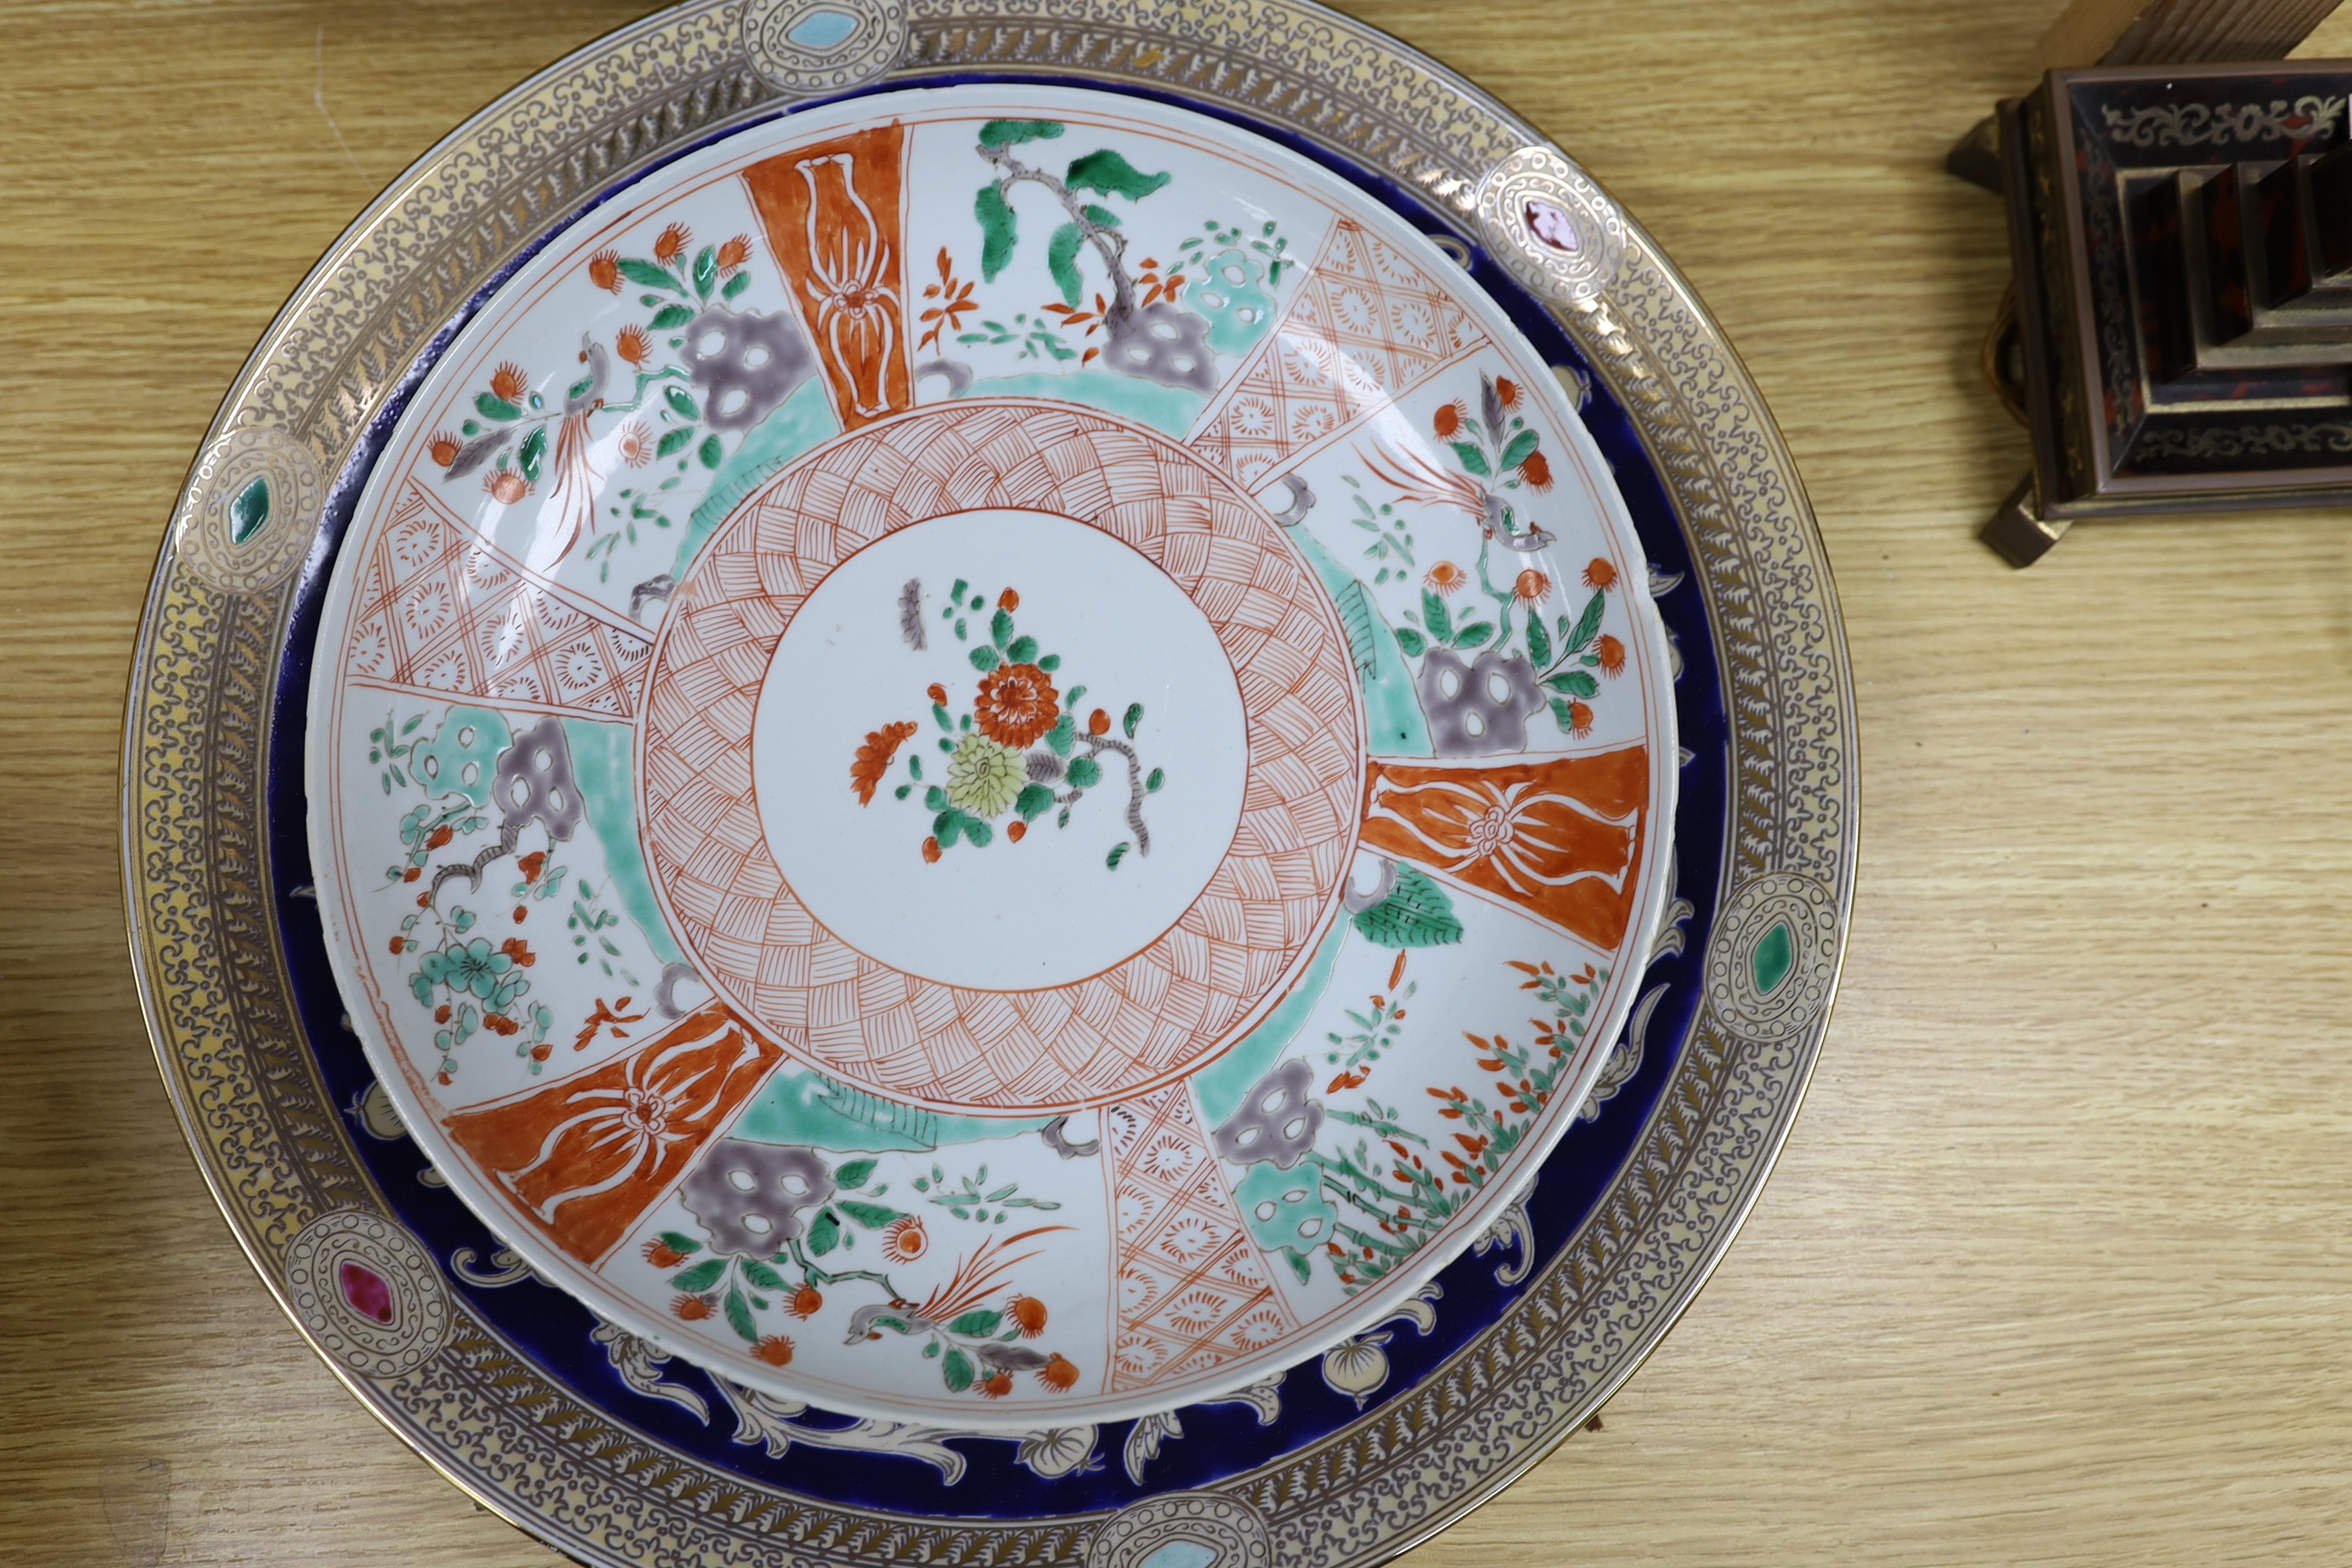 A group of 18th century and later Chinese enamelled and blue and white porcelain dishes and three bowls, Largest dish 35.5 cm diameter